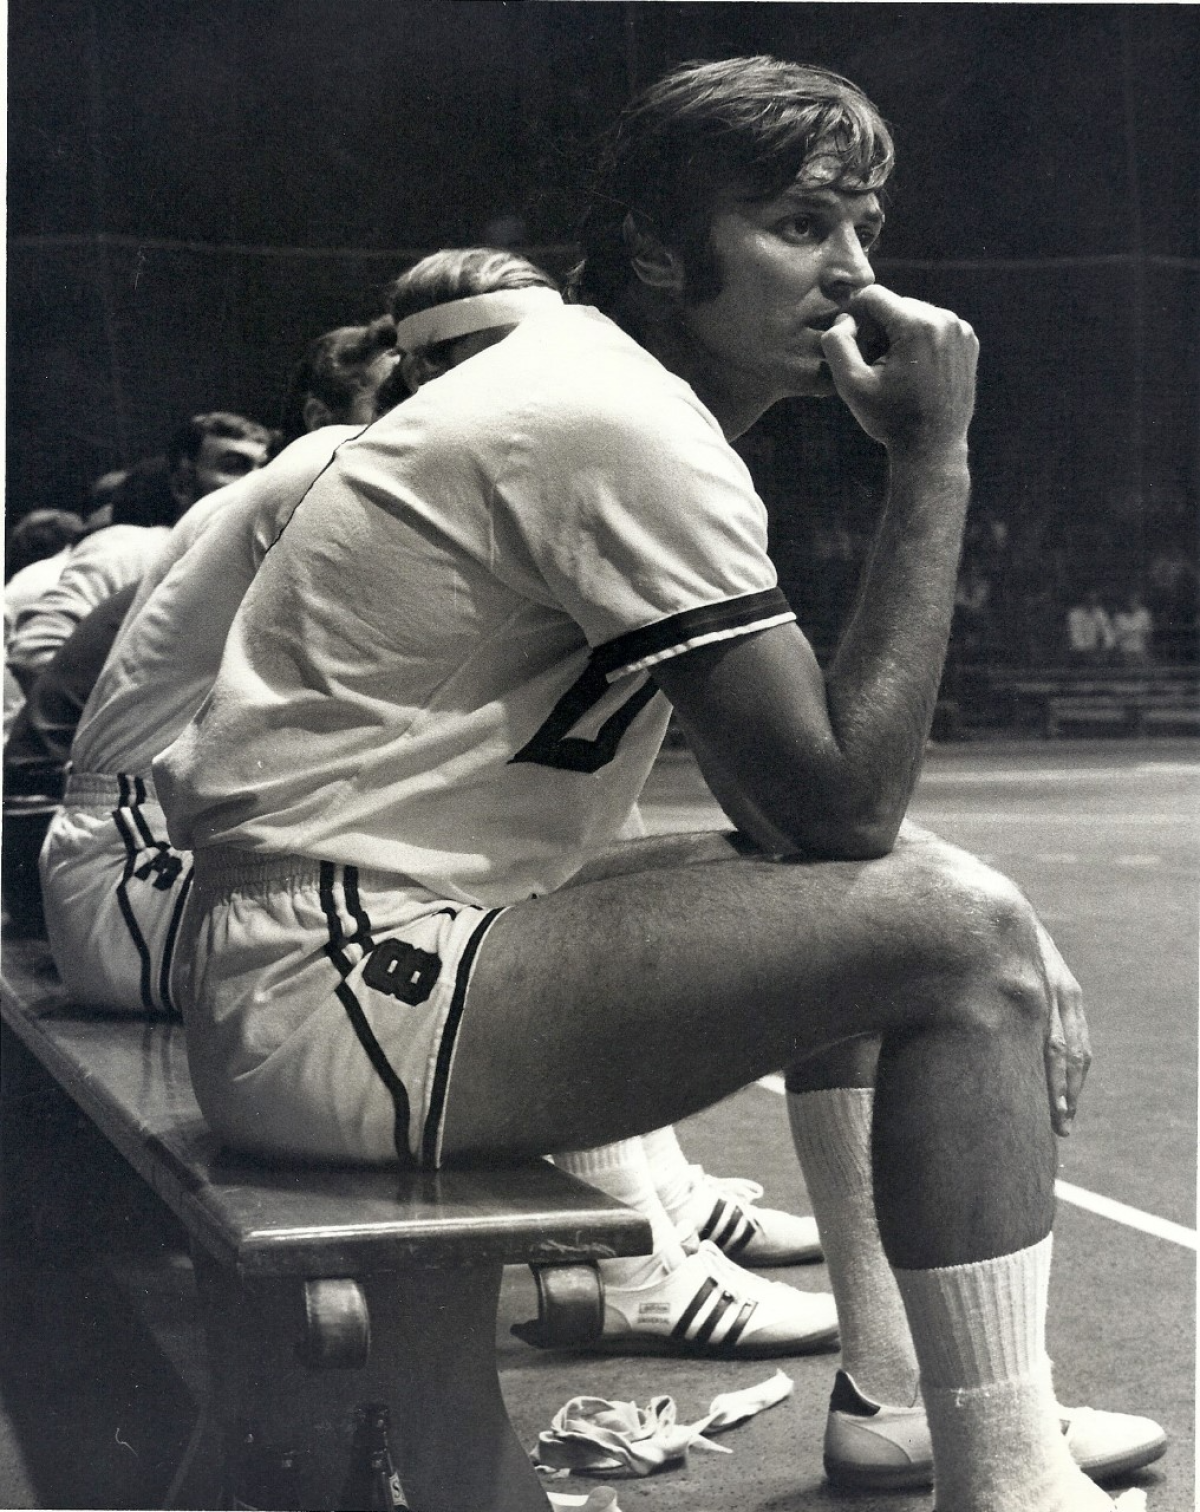 Dennis Berkholtz sits on the sidelines at a handball game in a black-and-white photo.